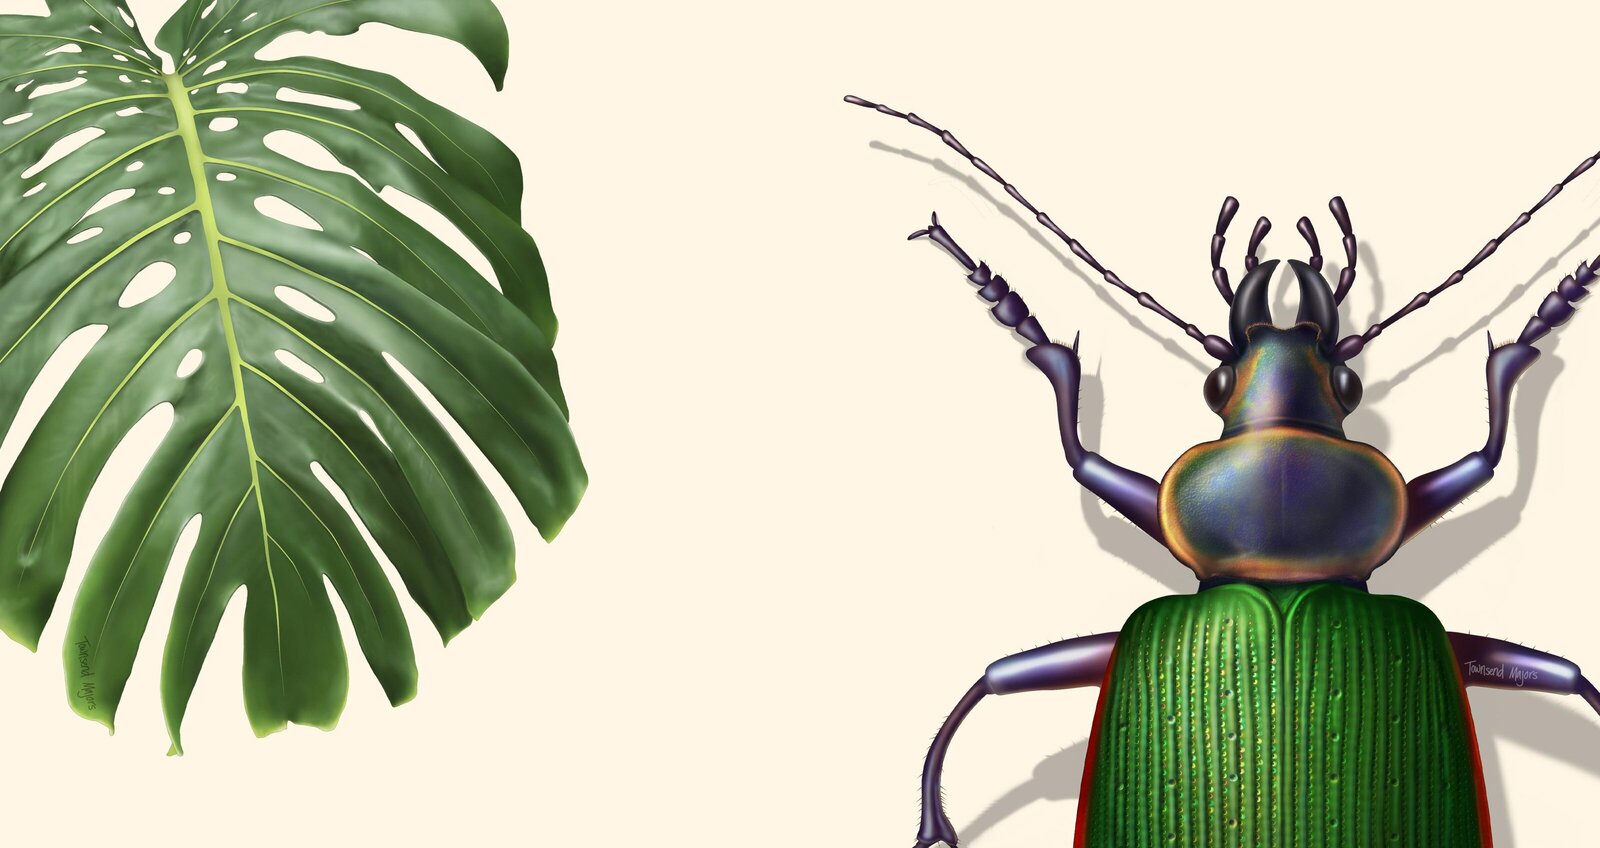 Townsend's monstera and ground beetle illustration